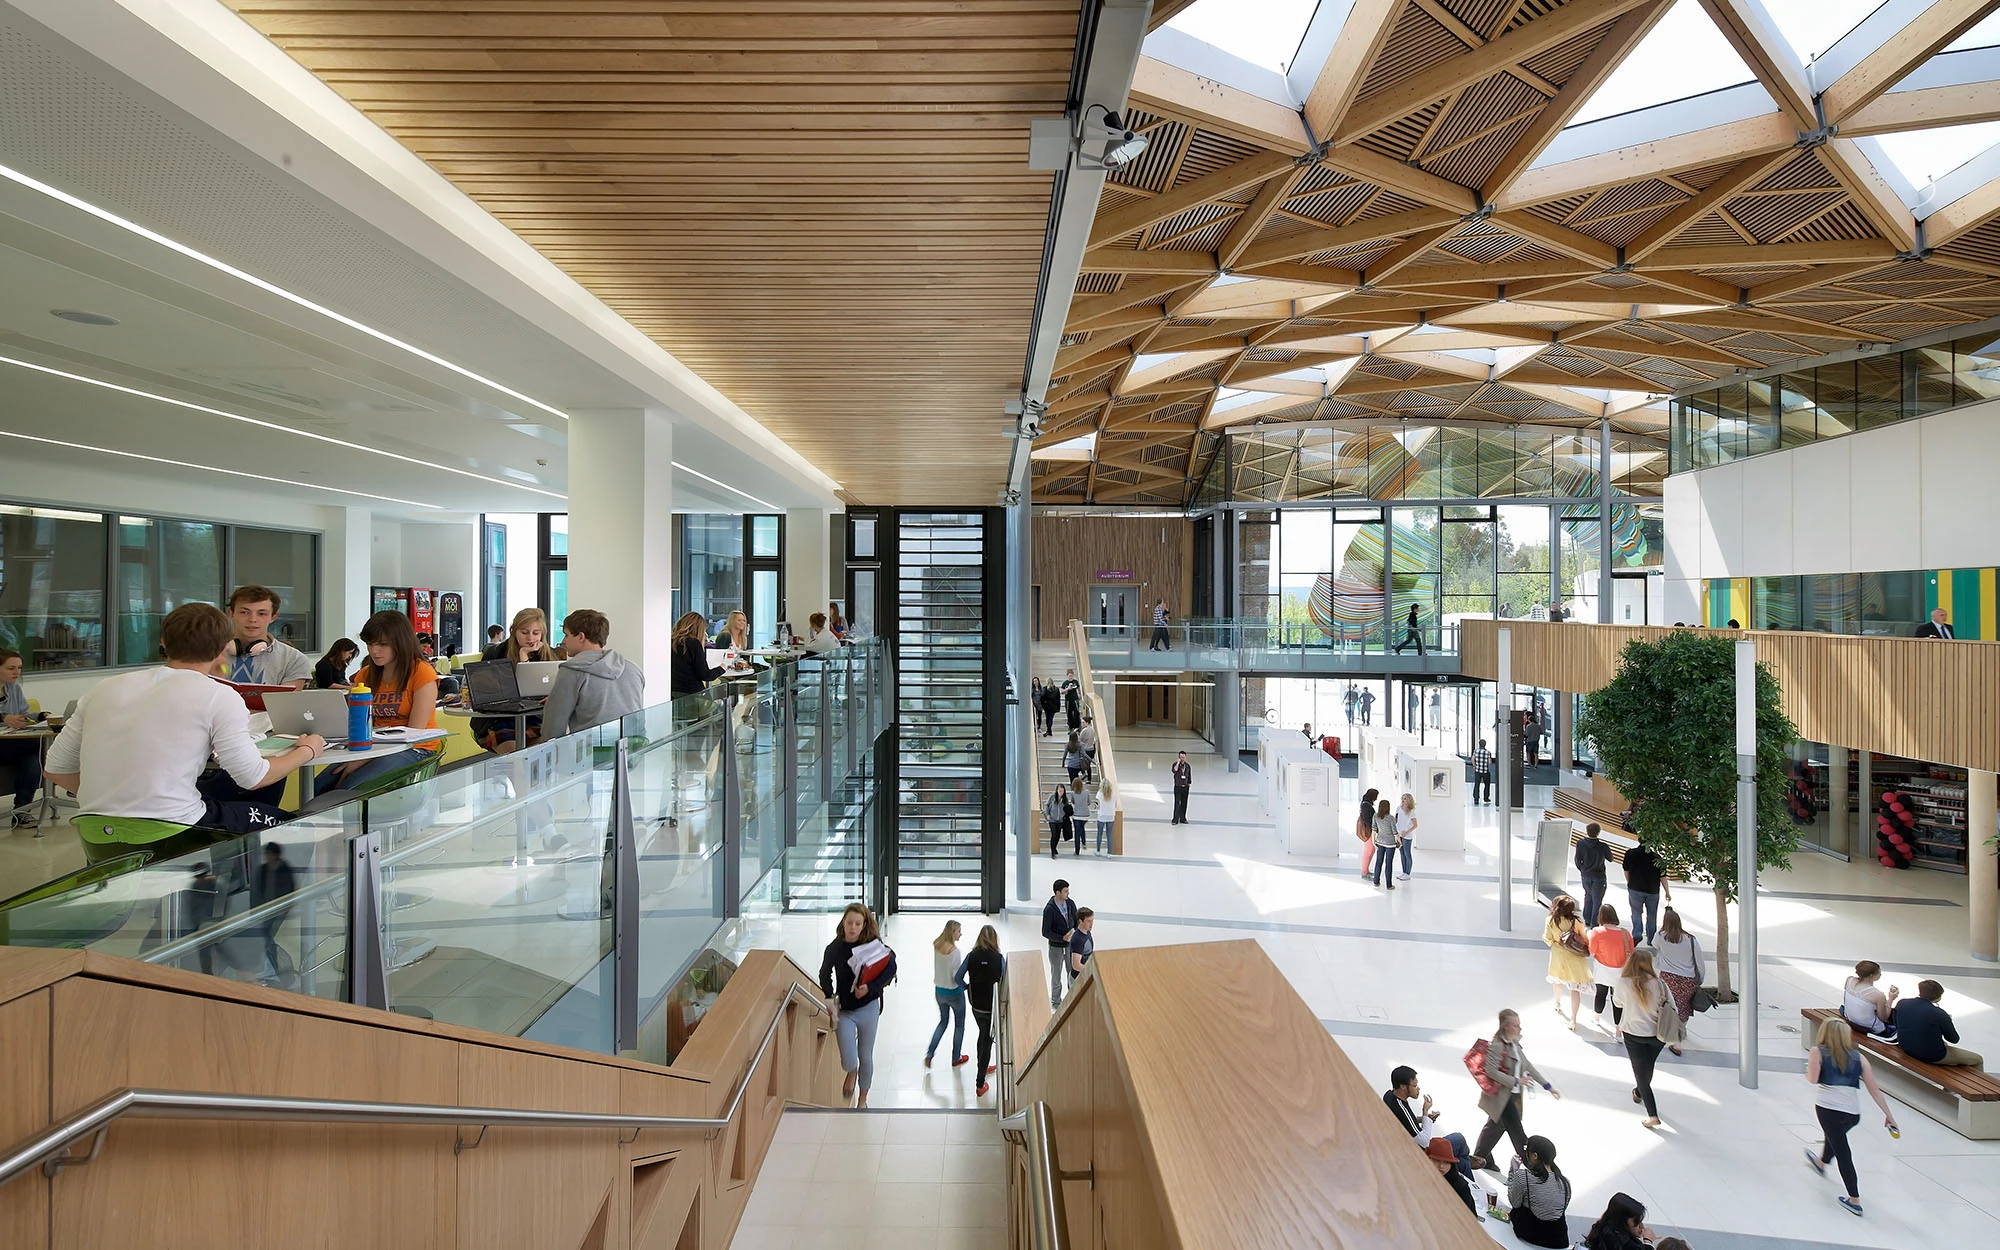 Interior of the Forum at the Exeter University